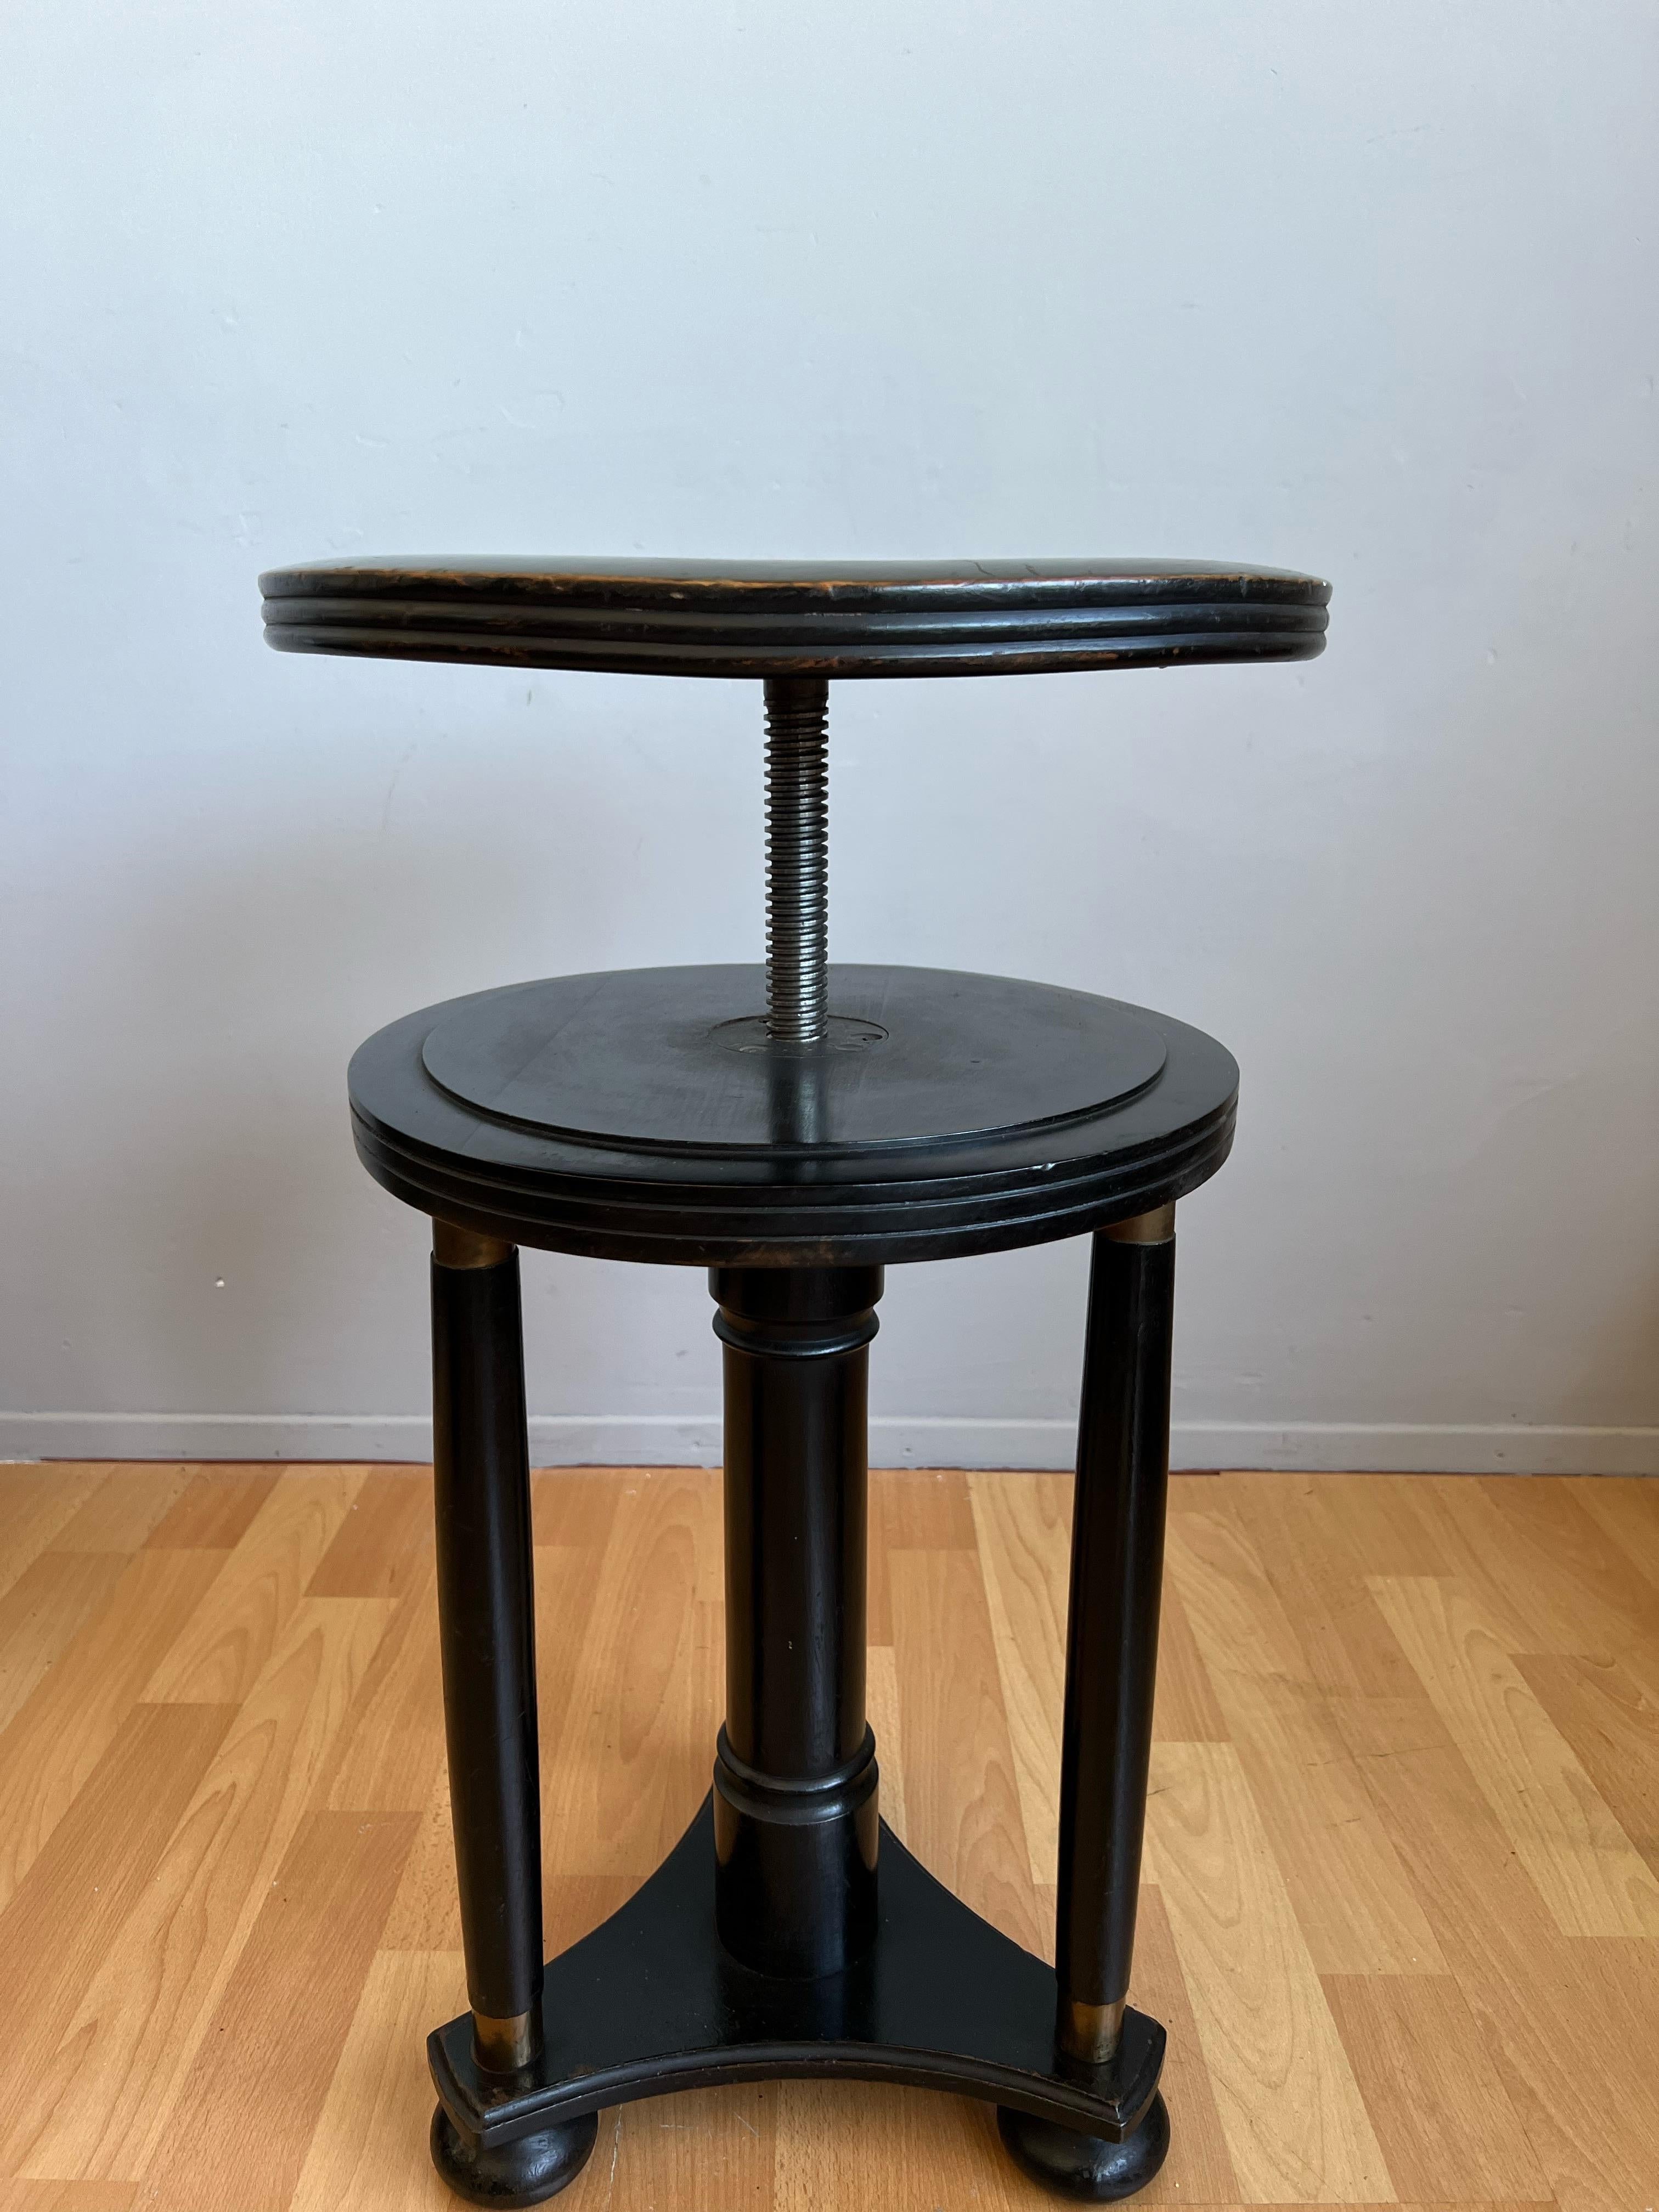 Stylish Blackened Wooden and Brass Art Deco Desk or Piano Swivel Stool, ca 1900 For Sale 12